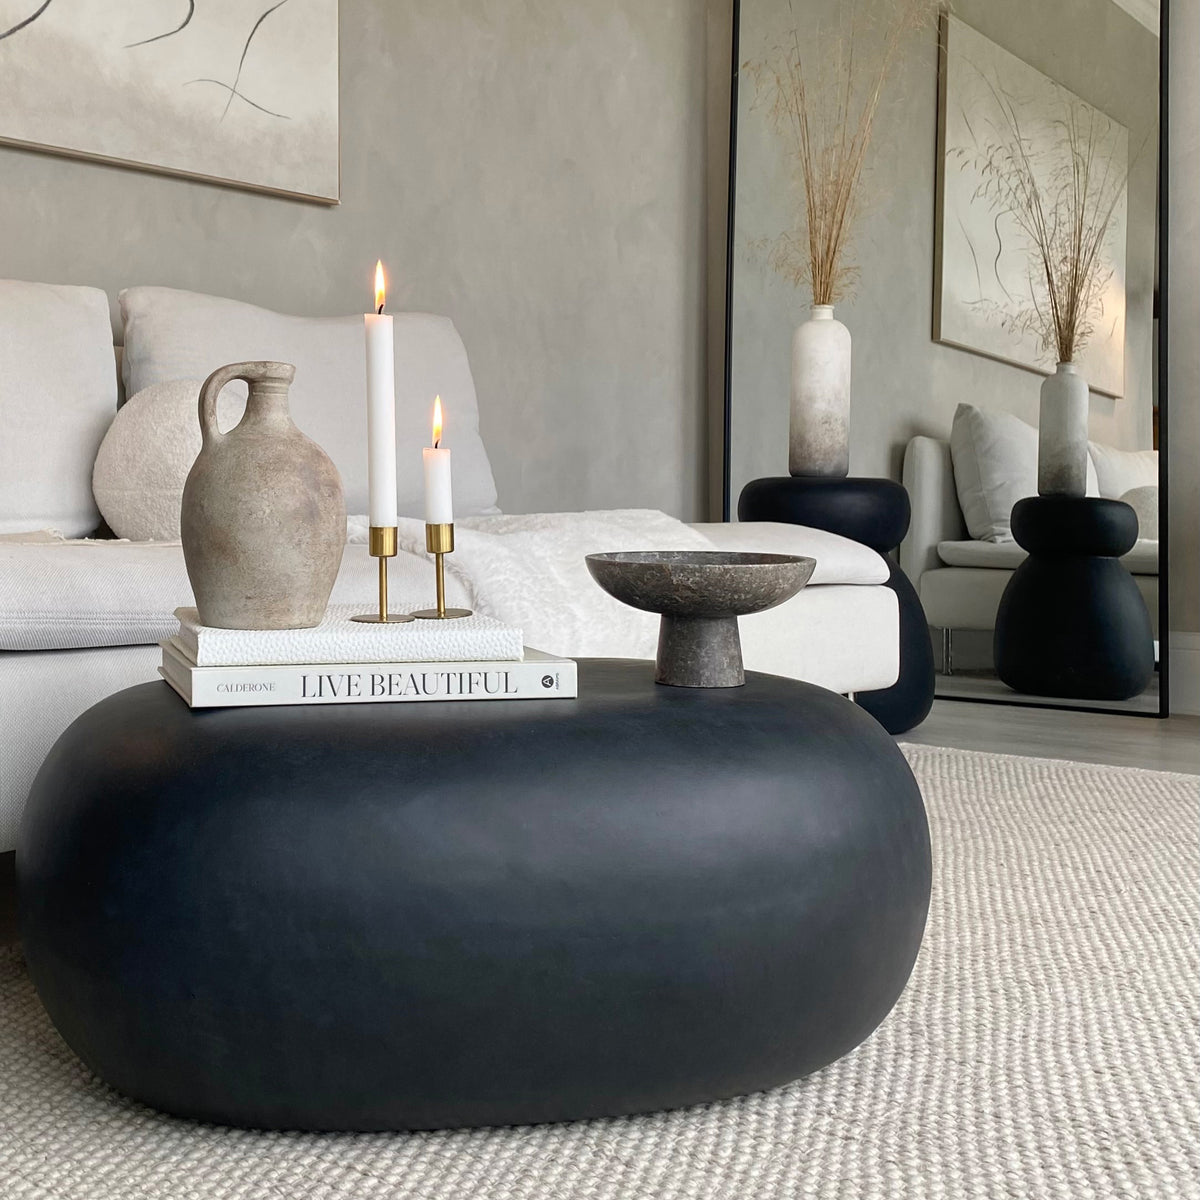 Minimal Onyx Pebble Coffee Table Large with candles